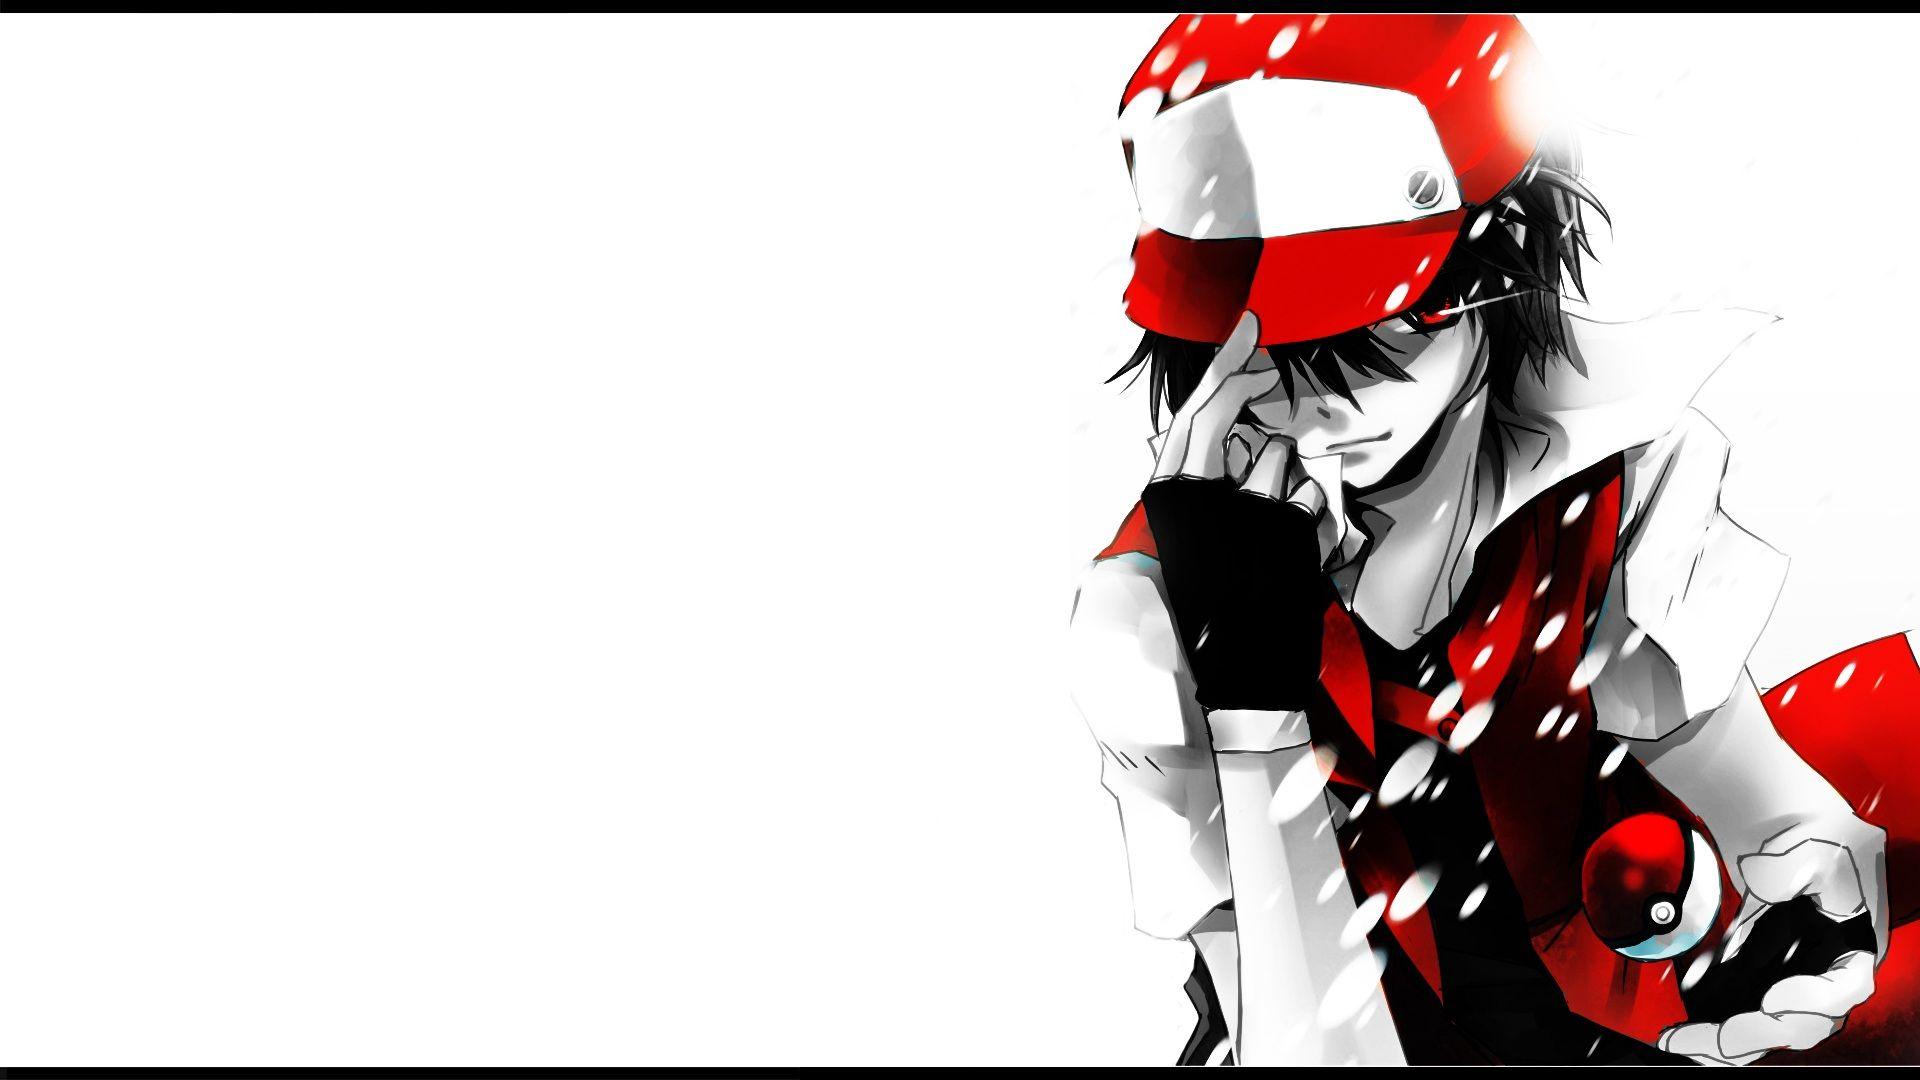 cool and stylish ash ketchum wallpaper HD background. Cool